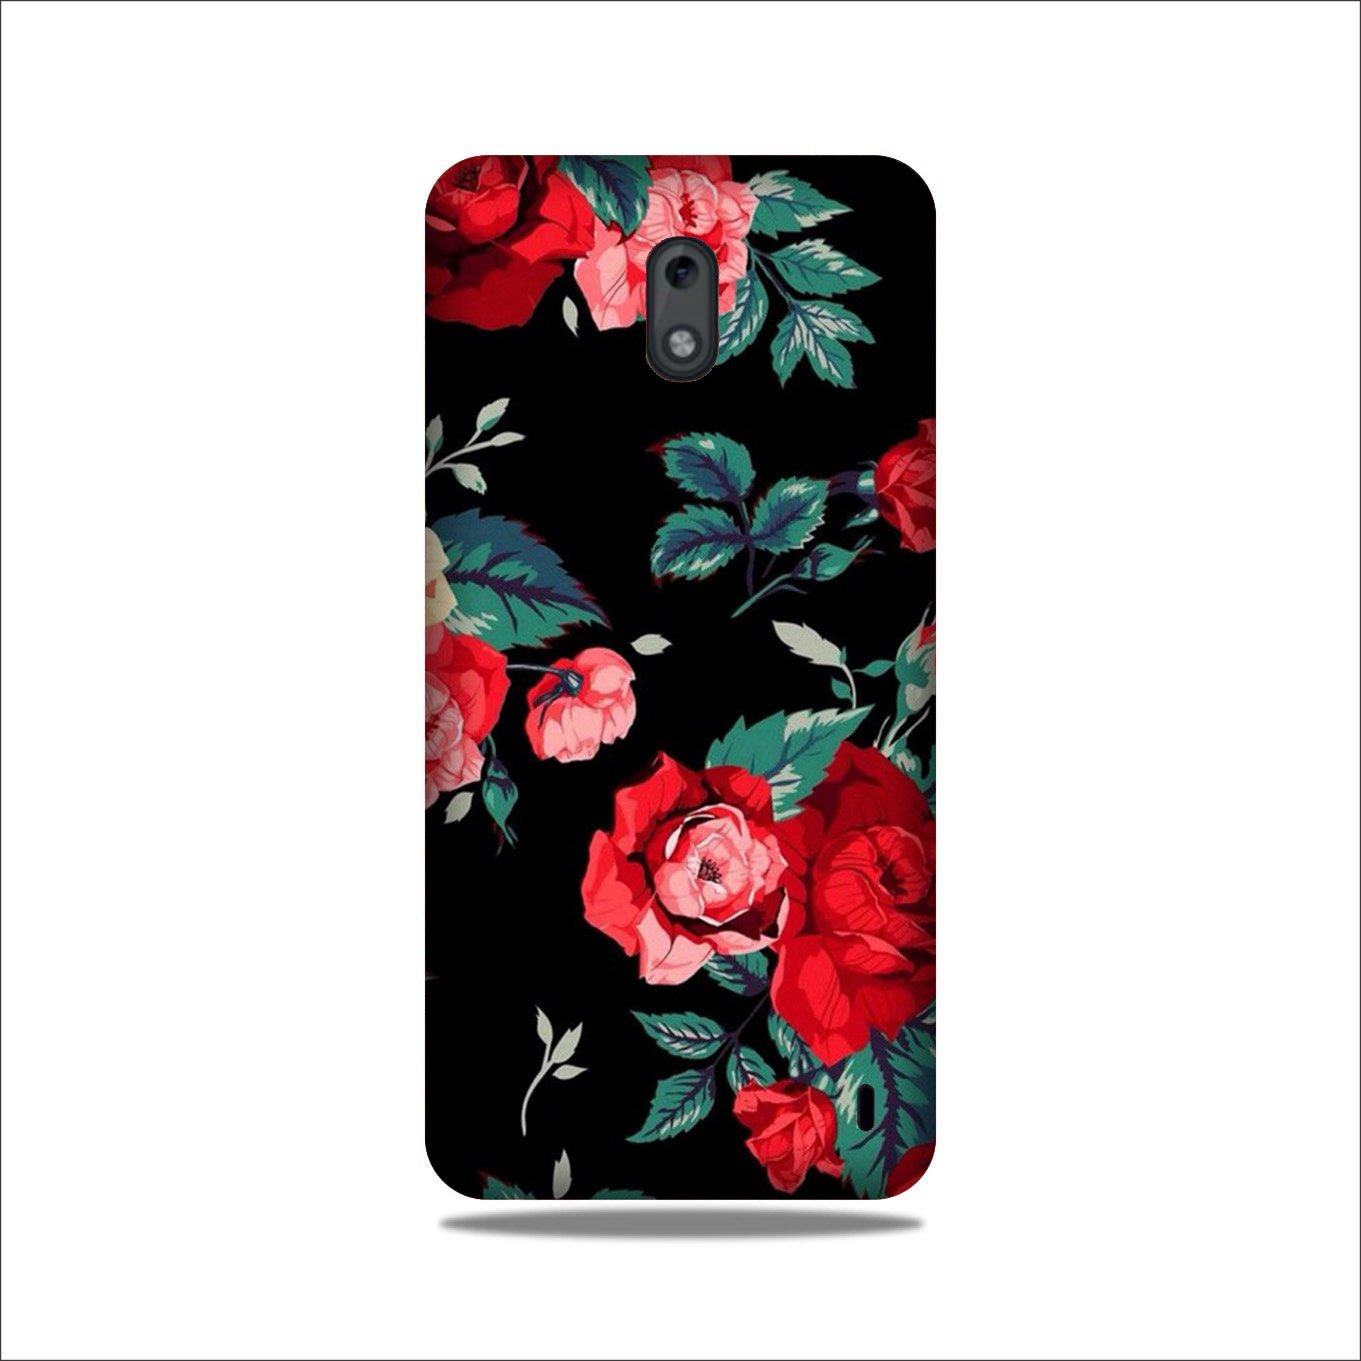 Red Rose2 Case for Nokia 3